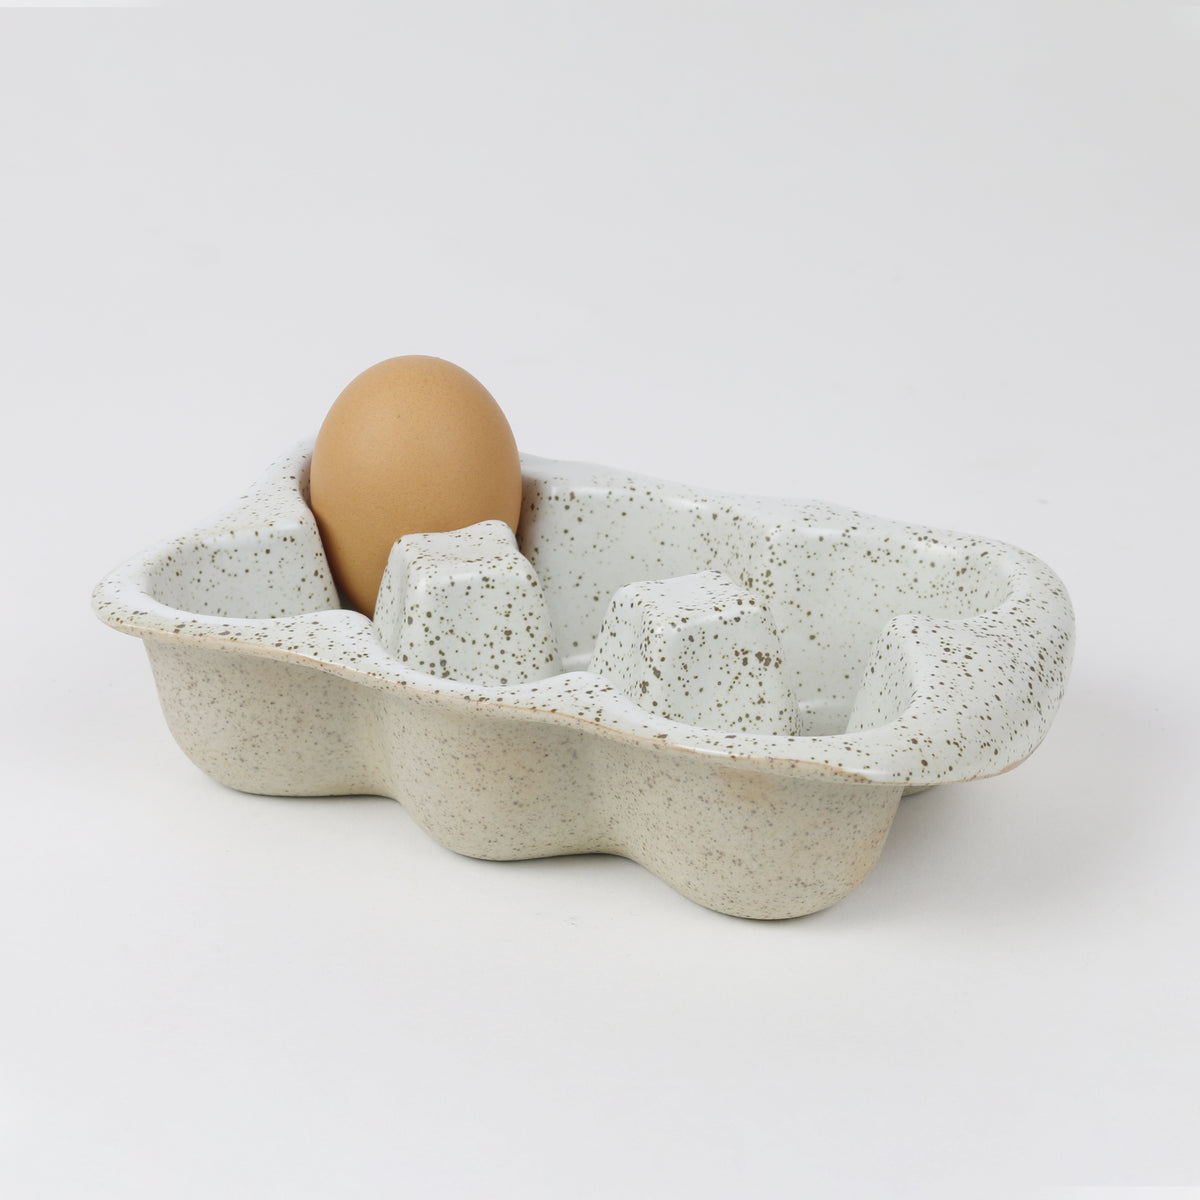 Garden to Table Egg Crate / Holds 6